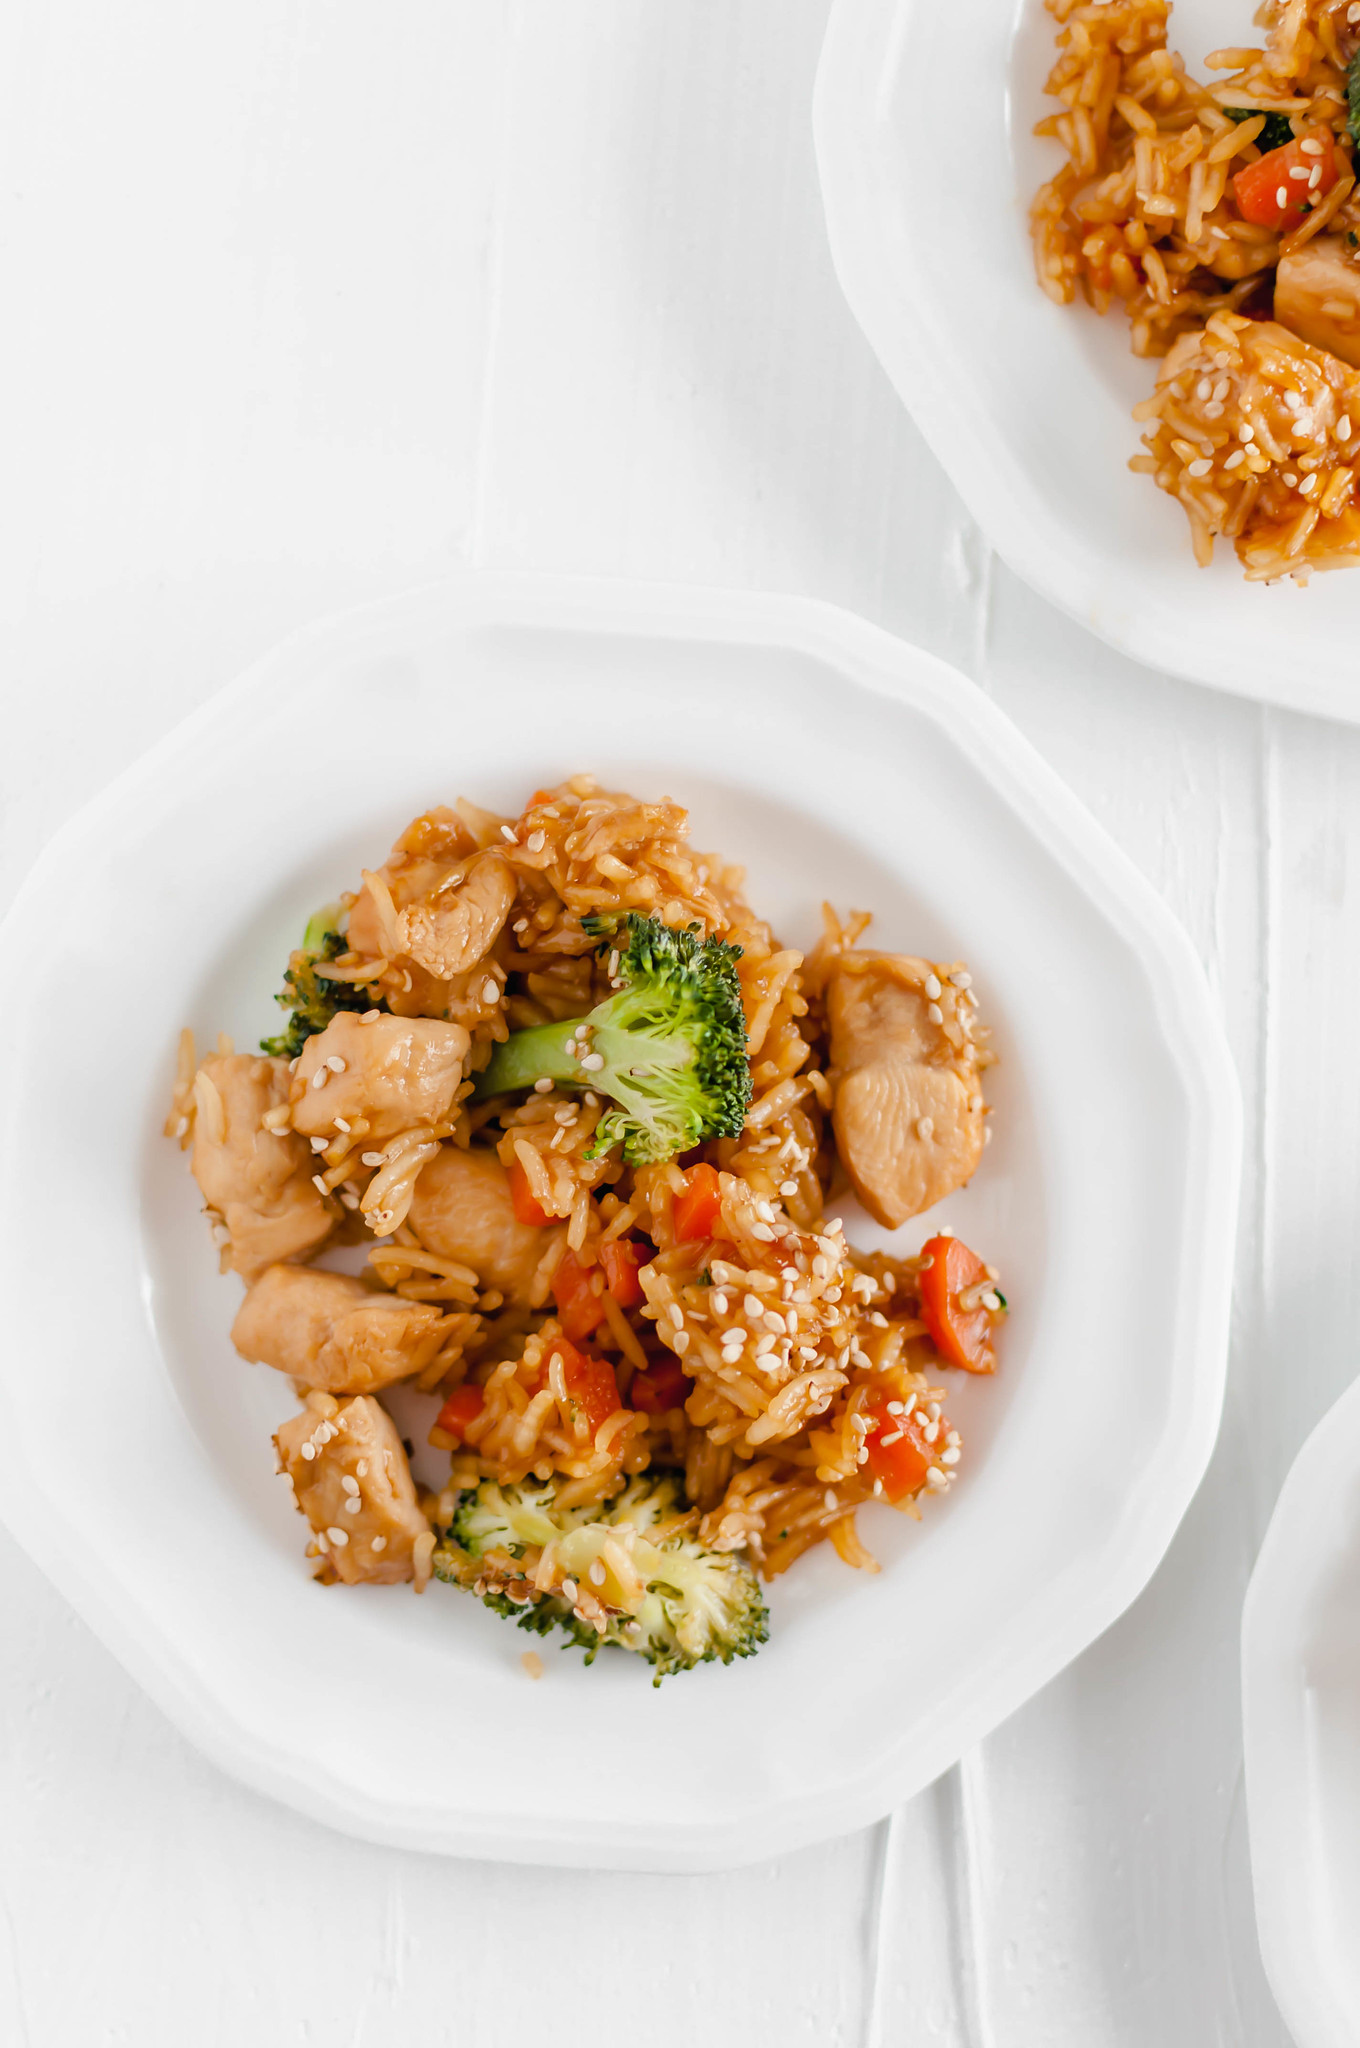 This One Pan Teriyaki Chicken and Rice only takes 30 minutes to prepare and is packed full of flavor. The perfect weeknight meal.